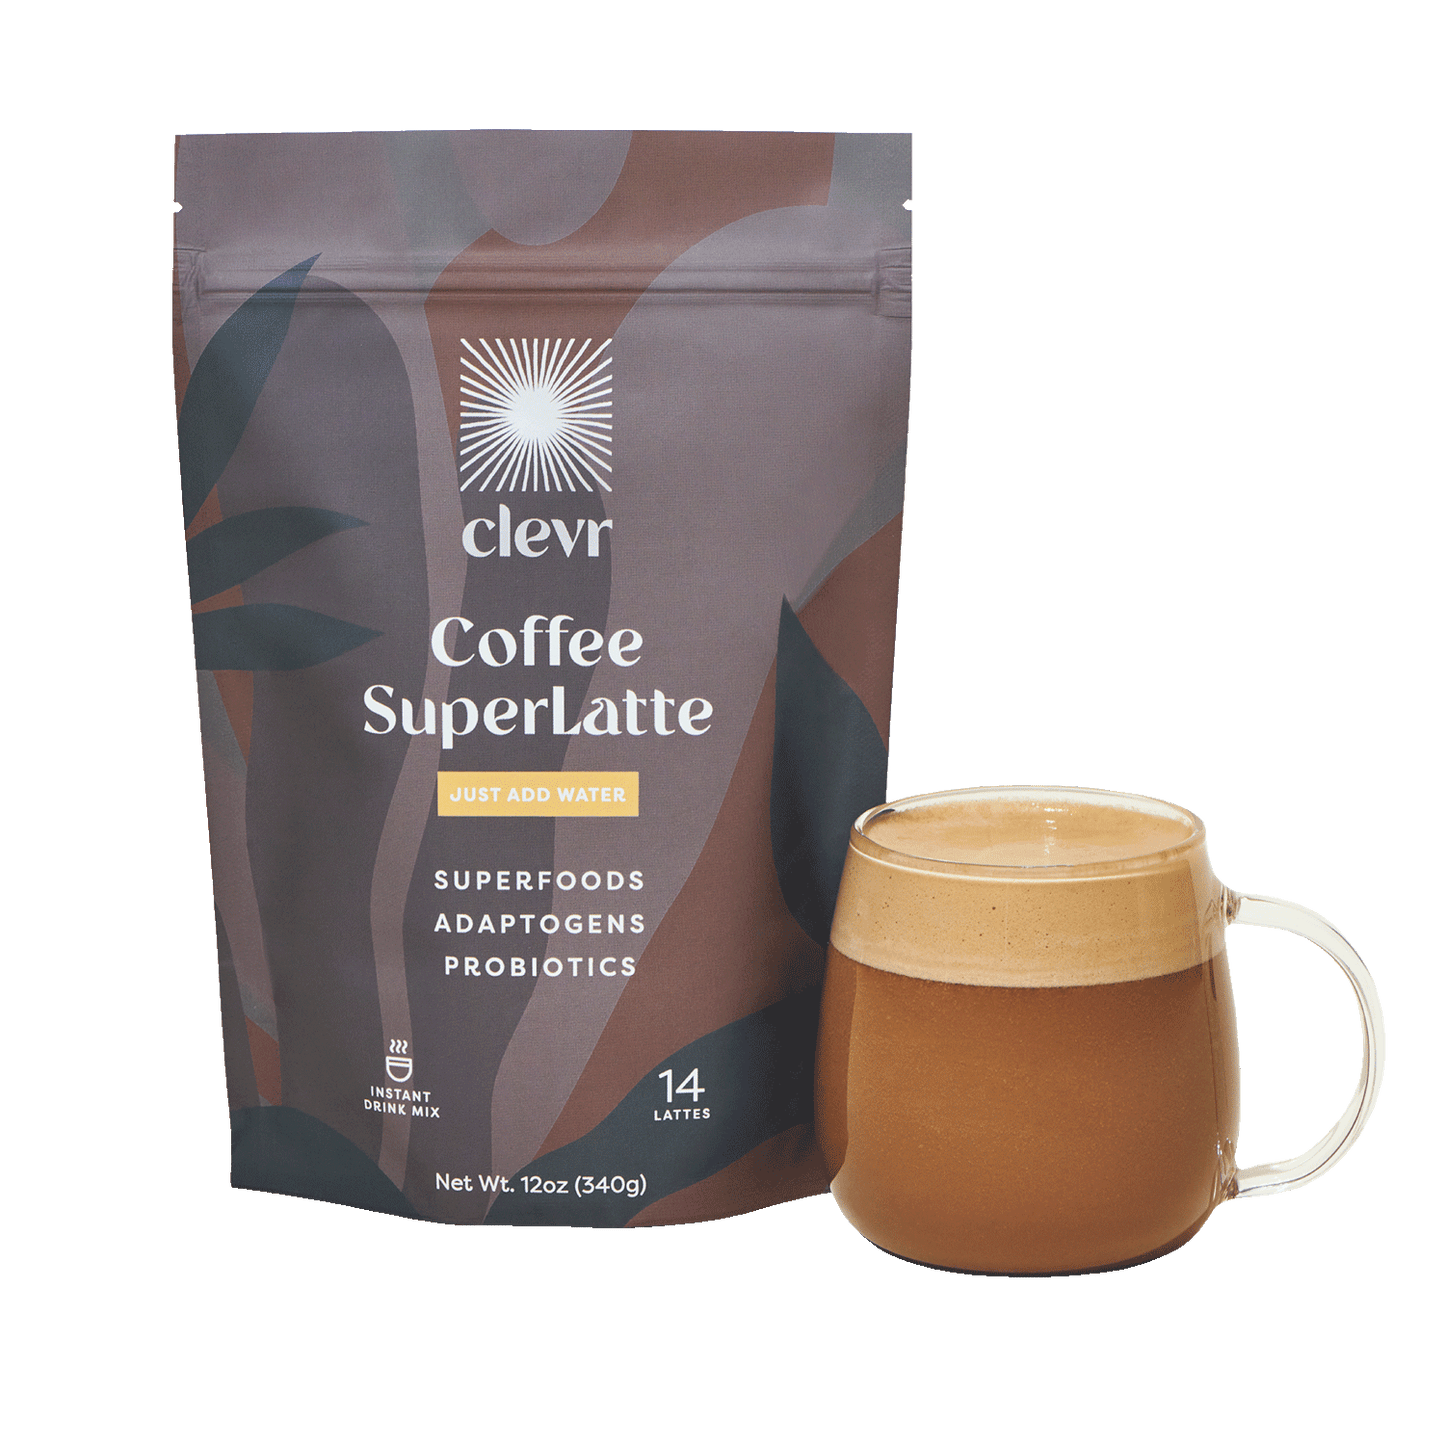 Coffee SuperLatte by Clevr Blends